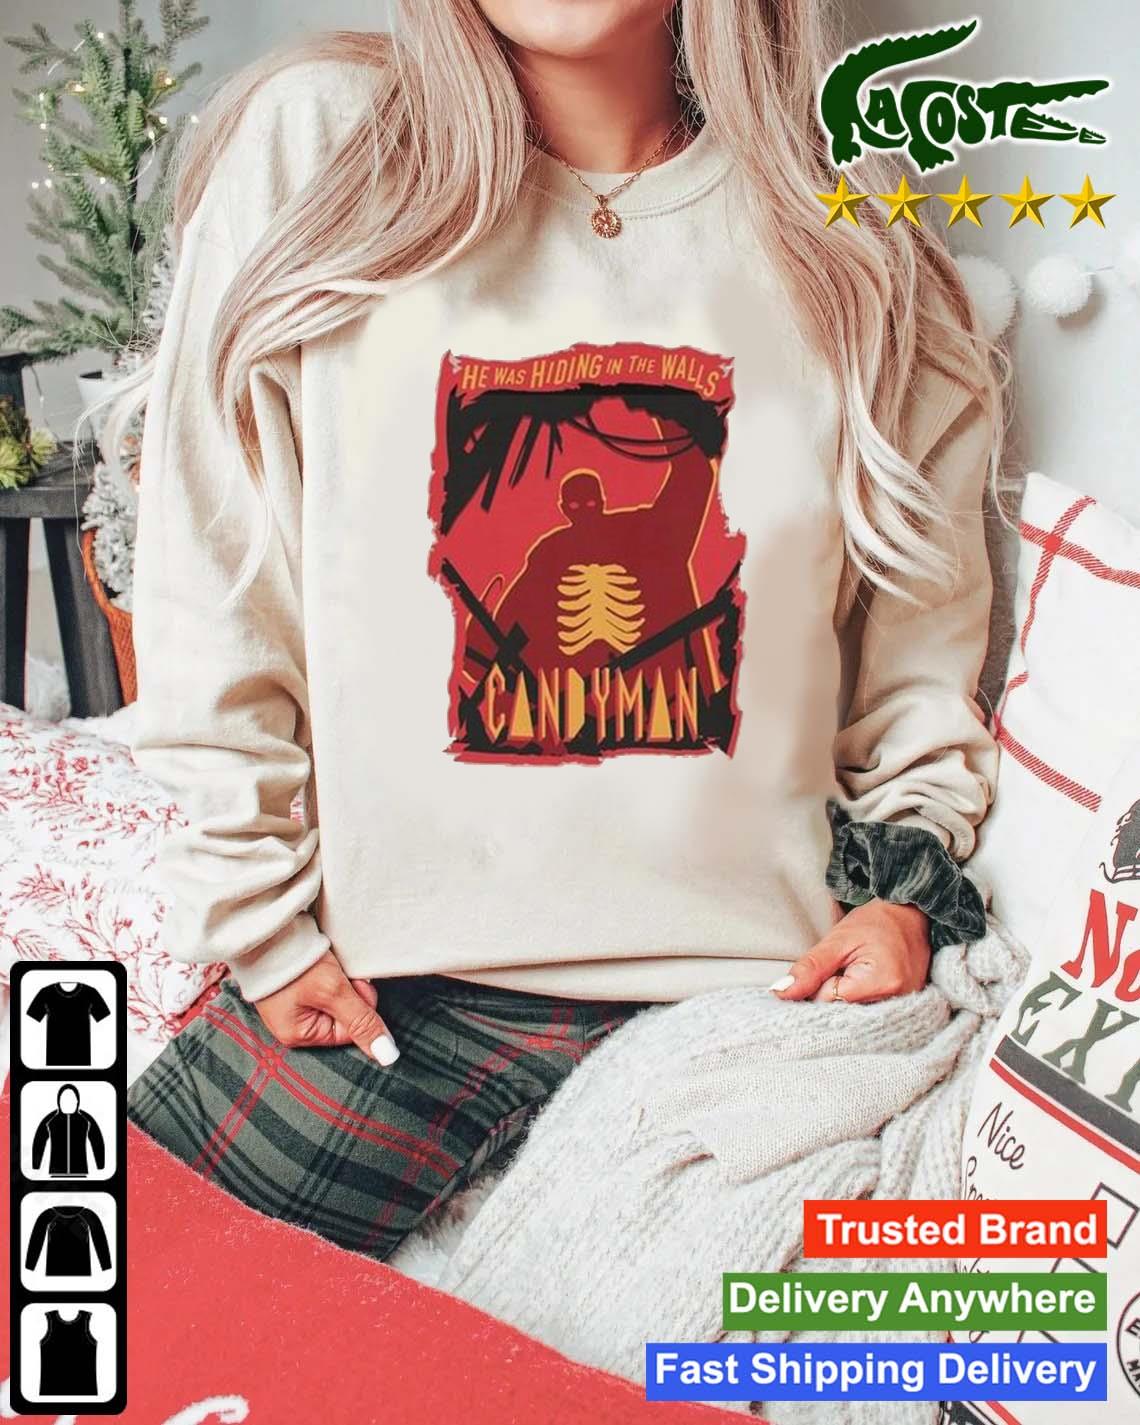 Official Candy Man He Was Hiding In The Walls Sweats Mockup Sweater